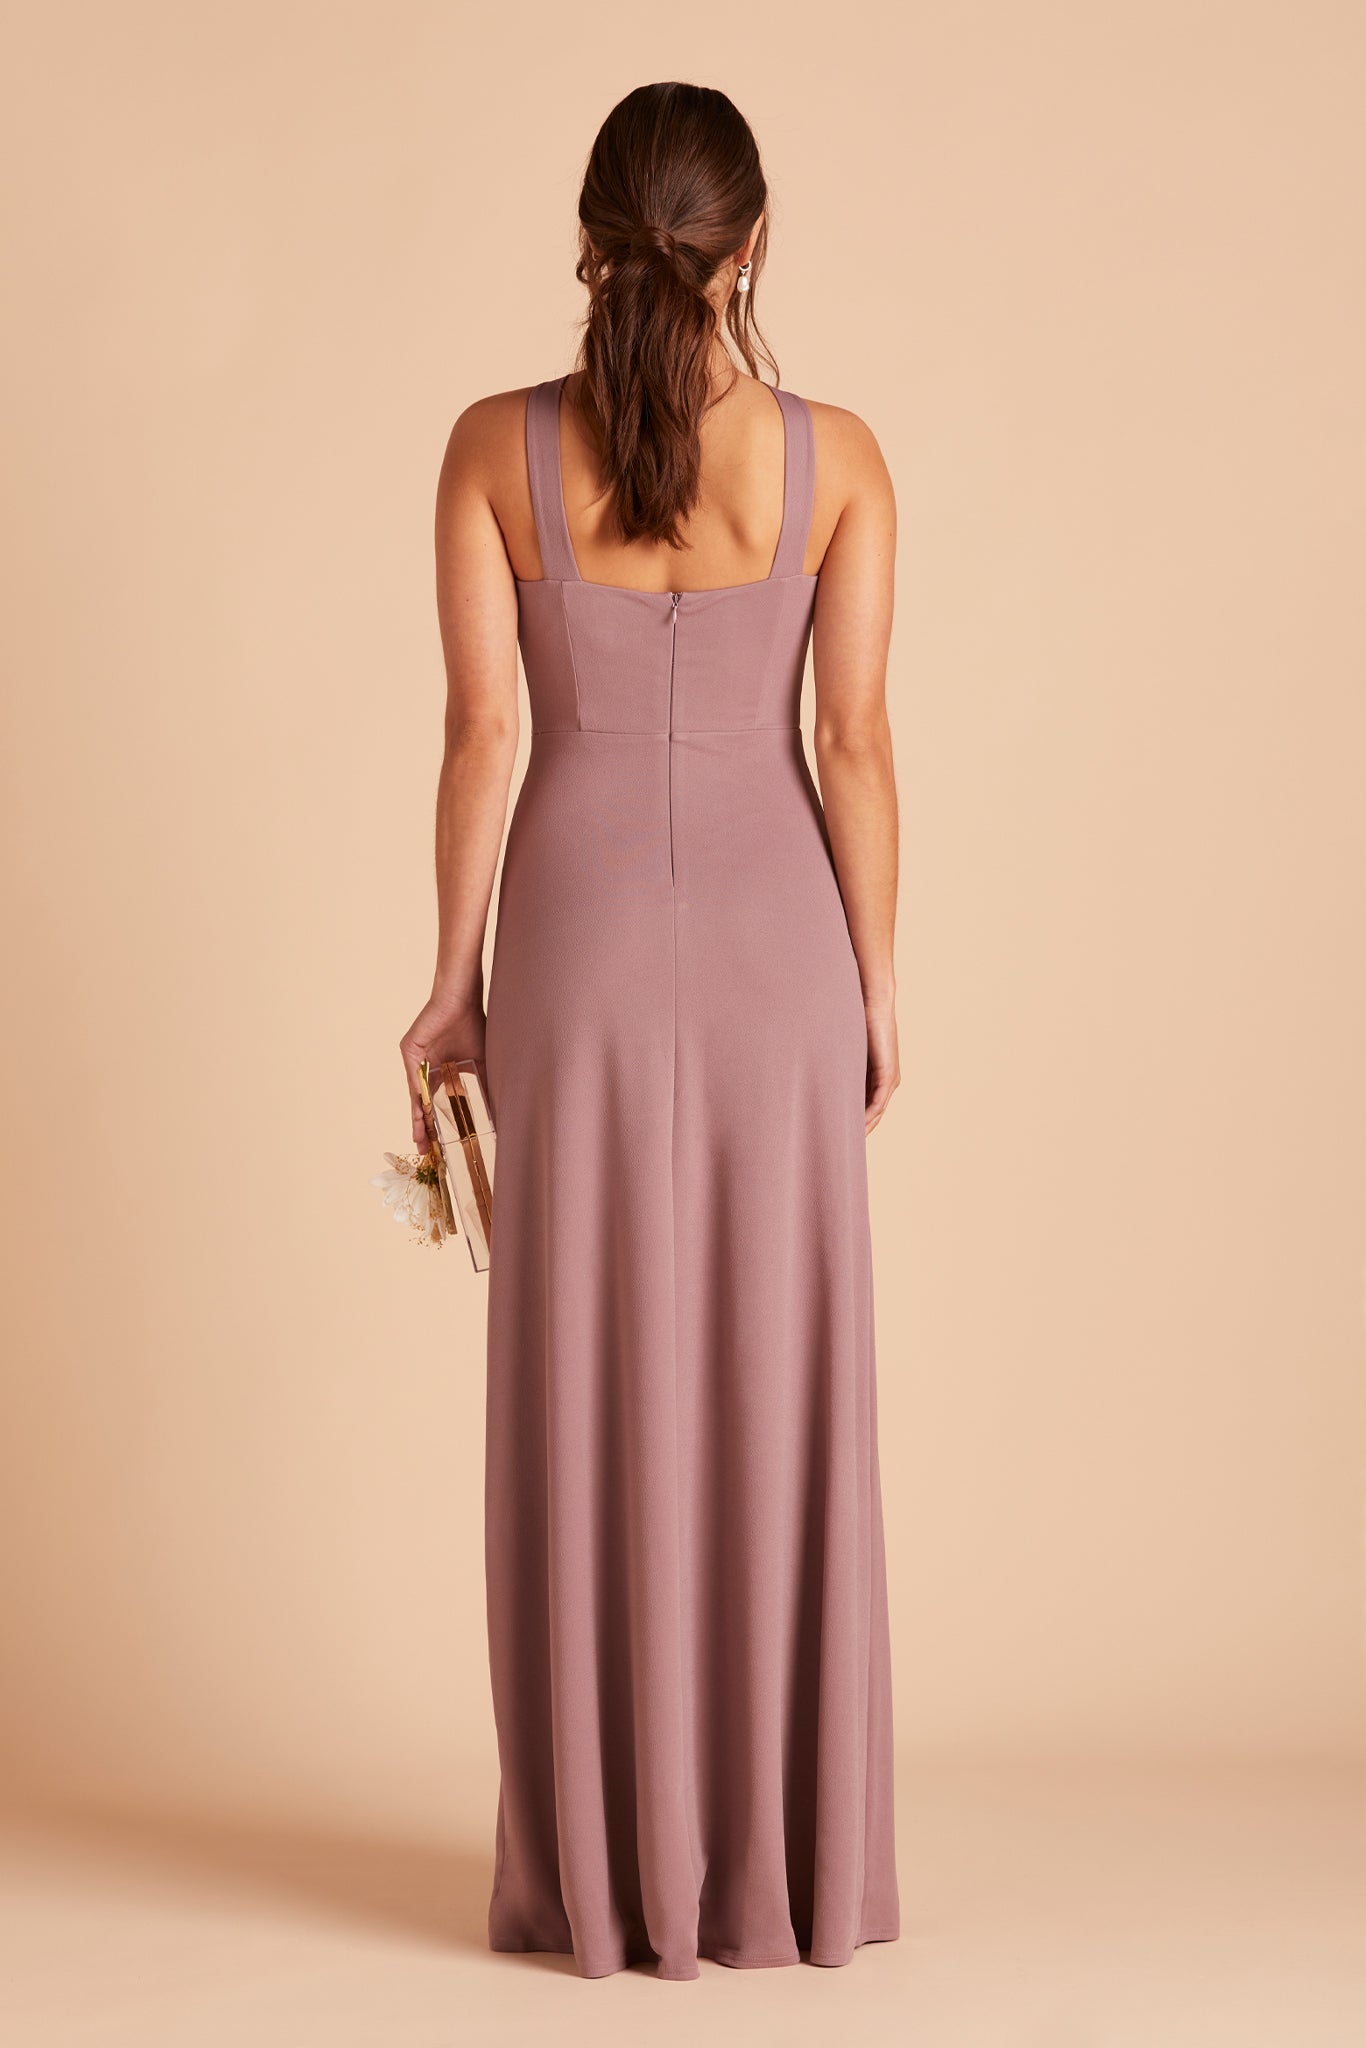 Gene bridesmaid dress with slit in dark mauve crepe by Birdy Grey, back view